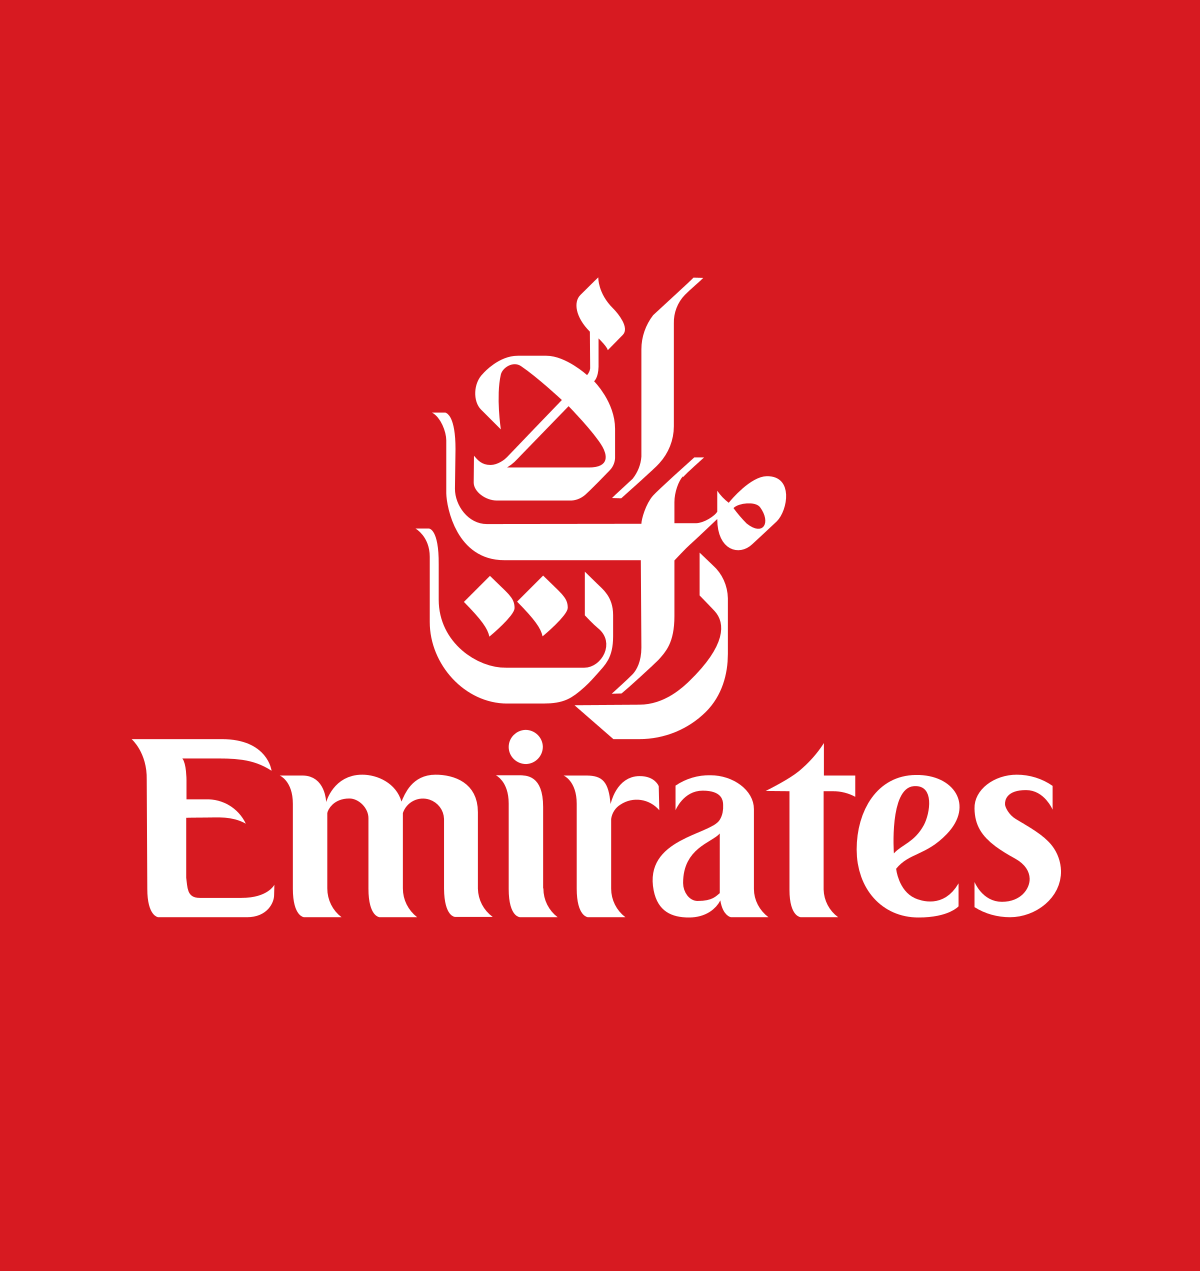 Green and Red Airline Logo - Emirates (airline)